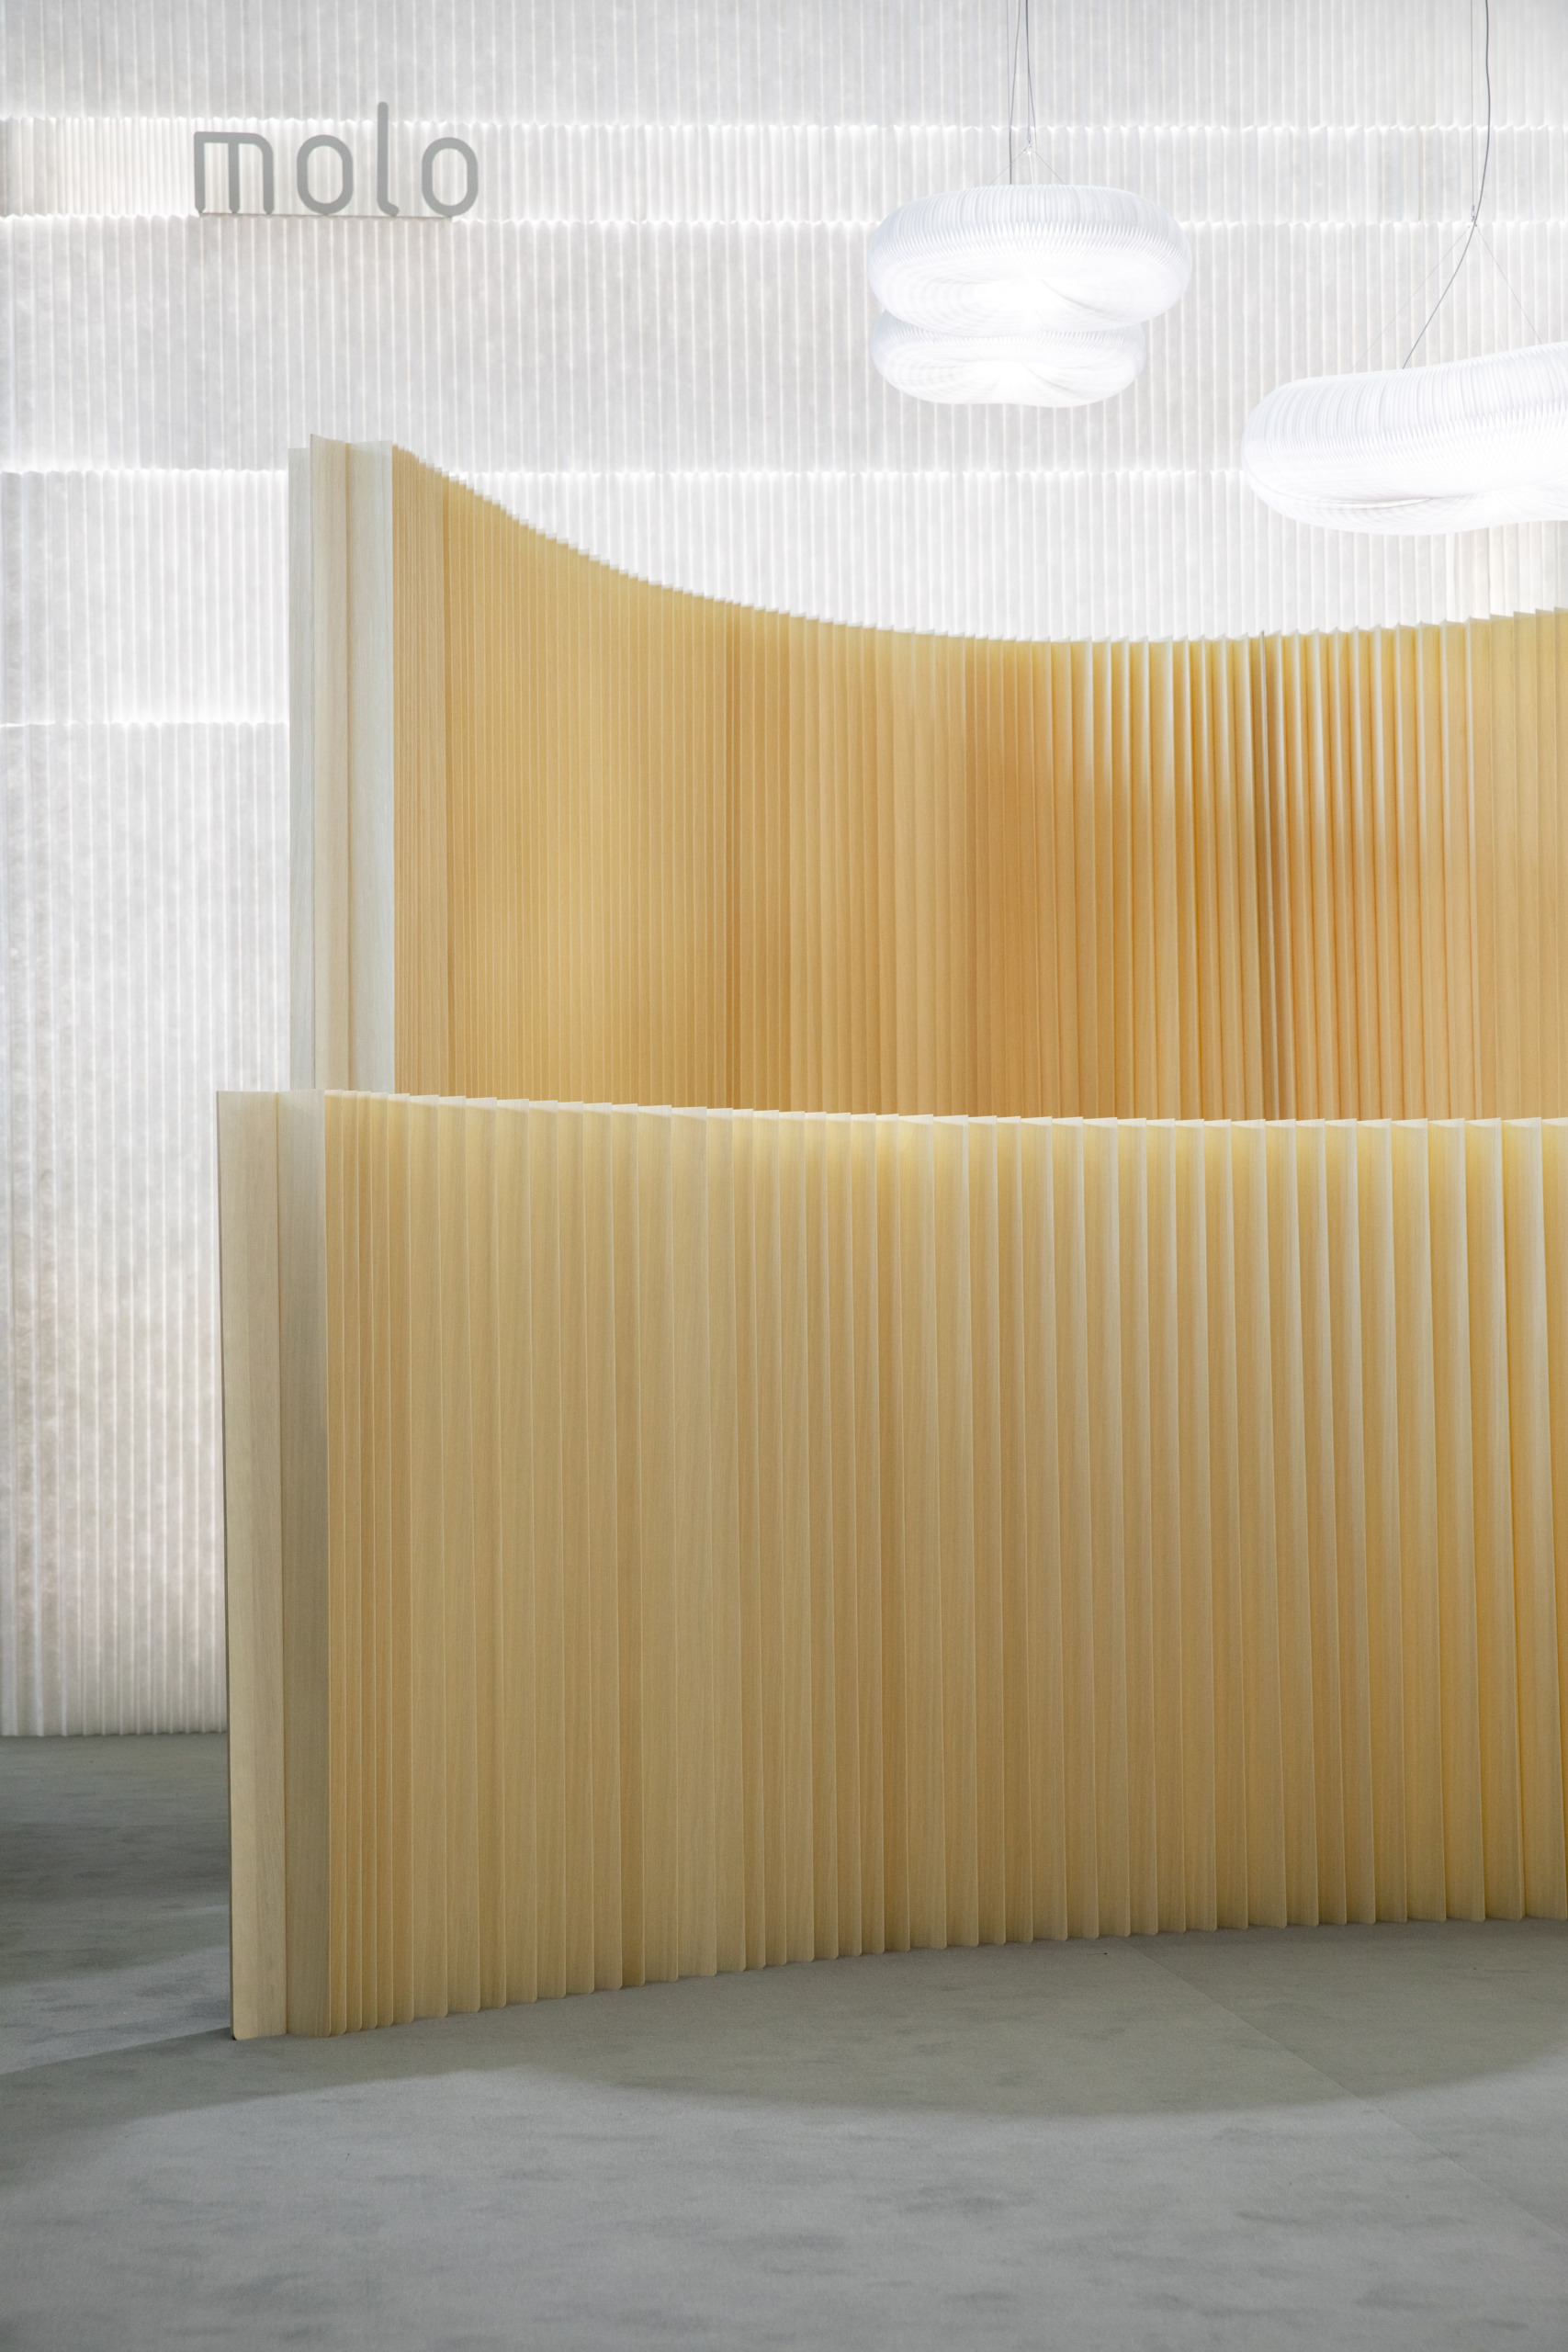 modern wooden room dividers by molo - maple